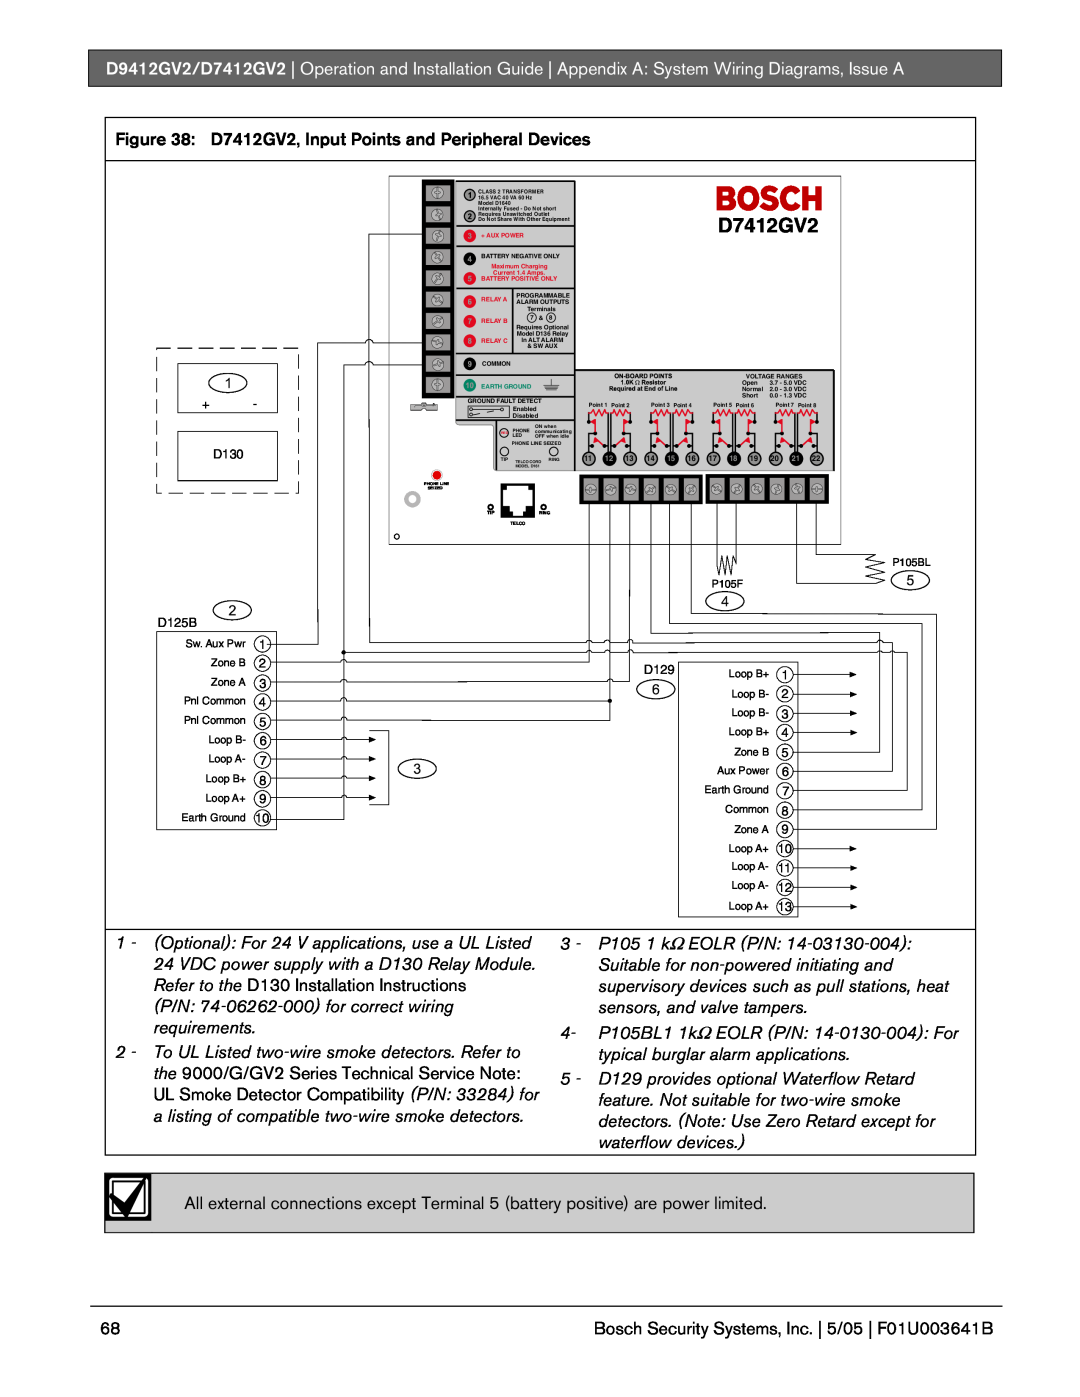 Bosch Appliances D9412GV2 manual UL Smoke Detector Compatibility P/N: 33284 for, D7412GV2 